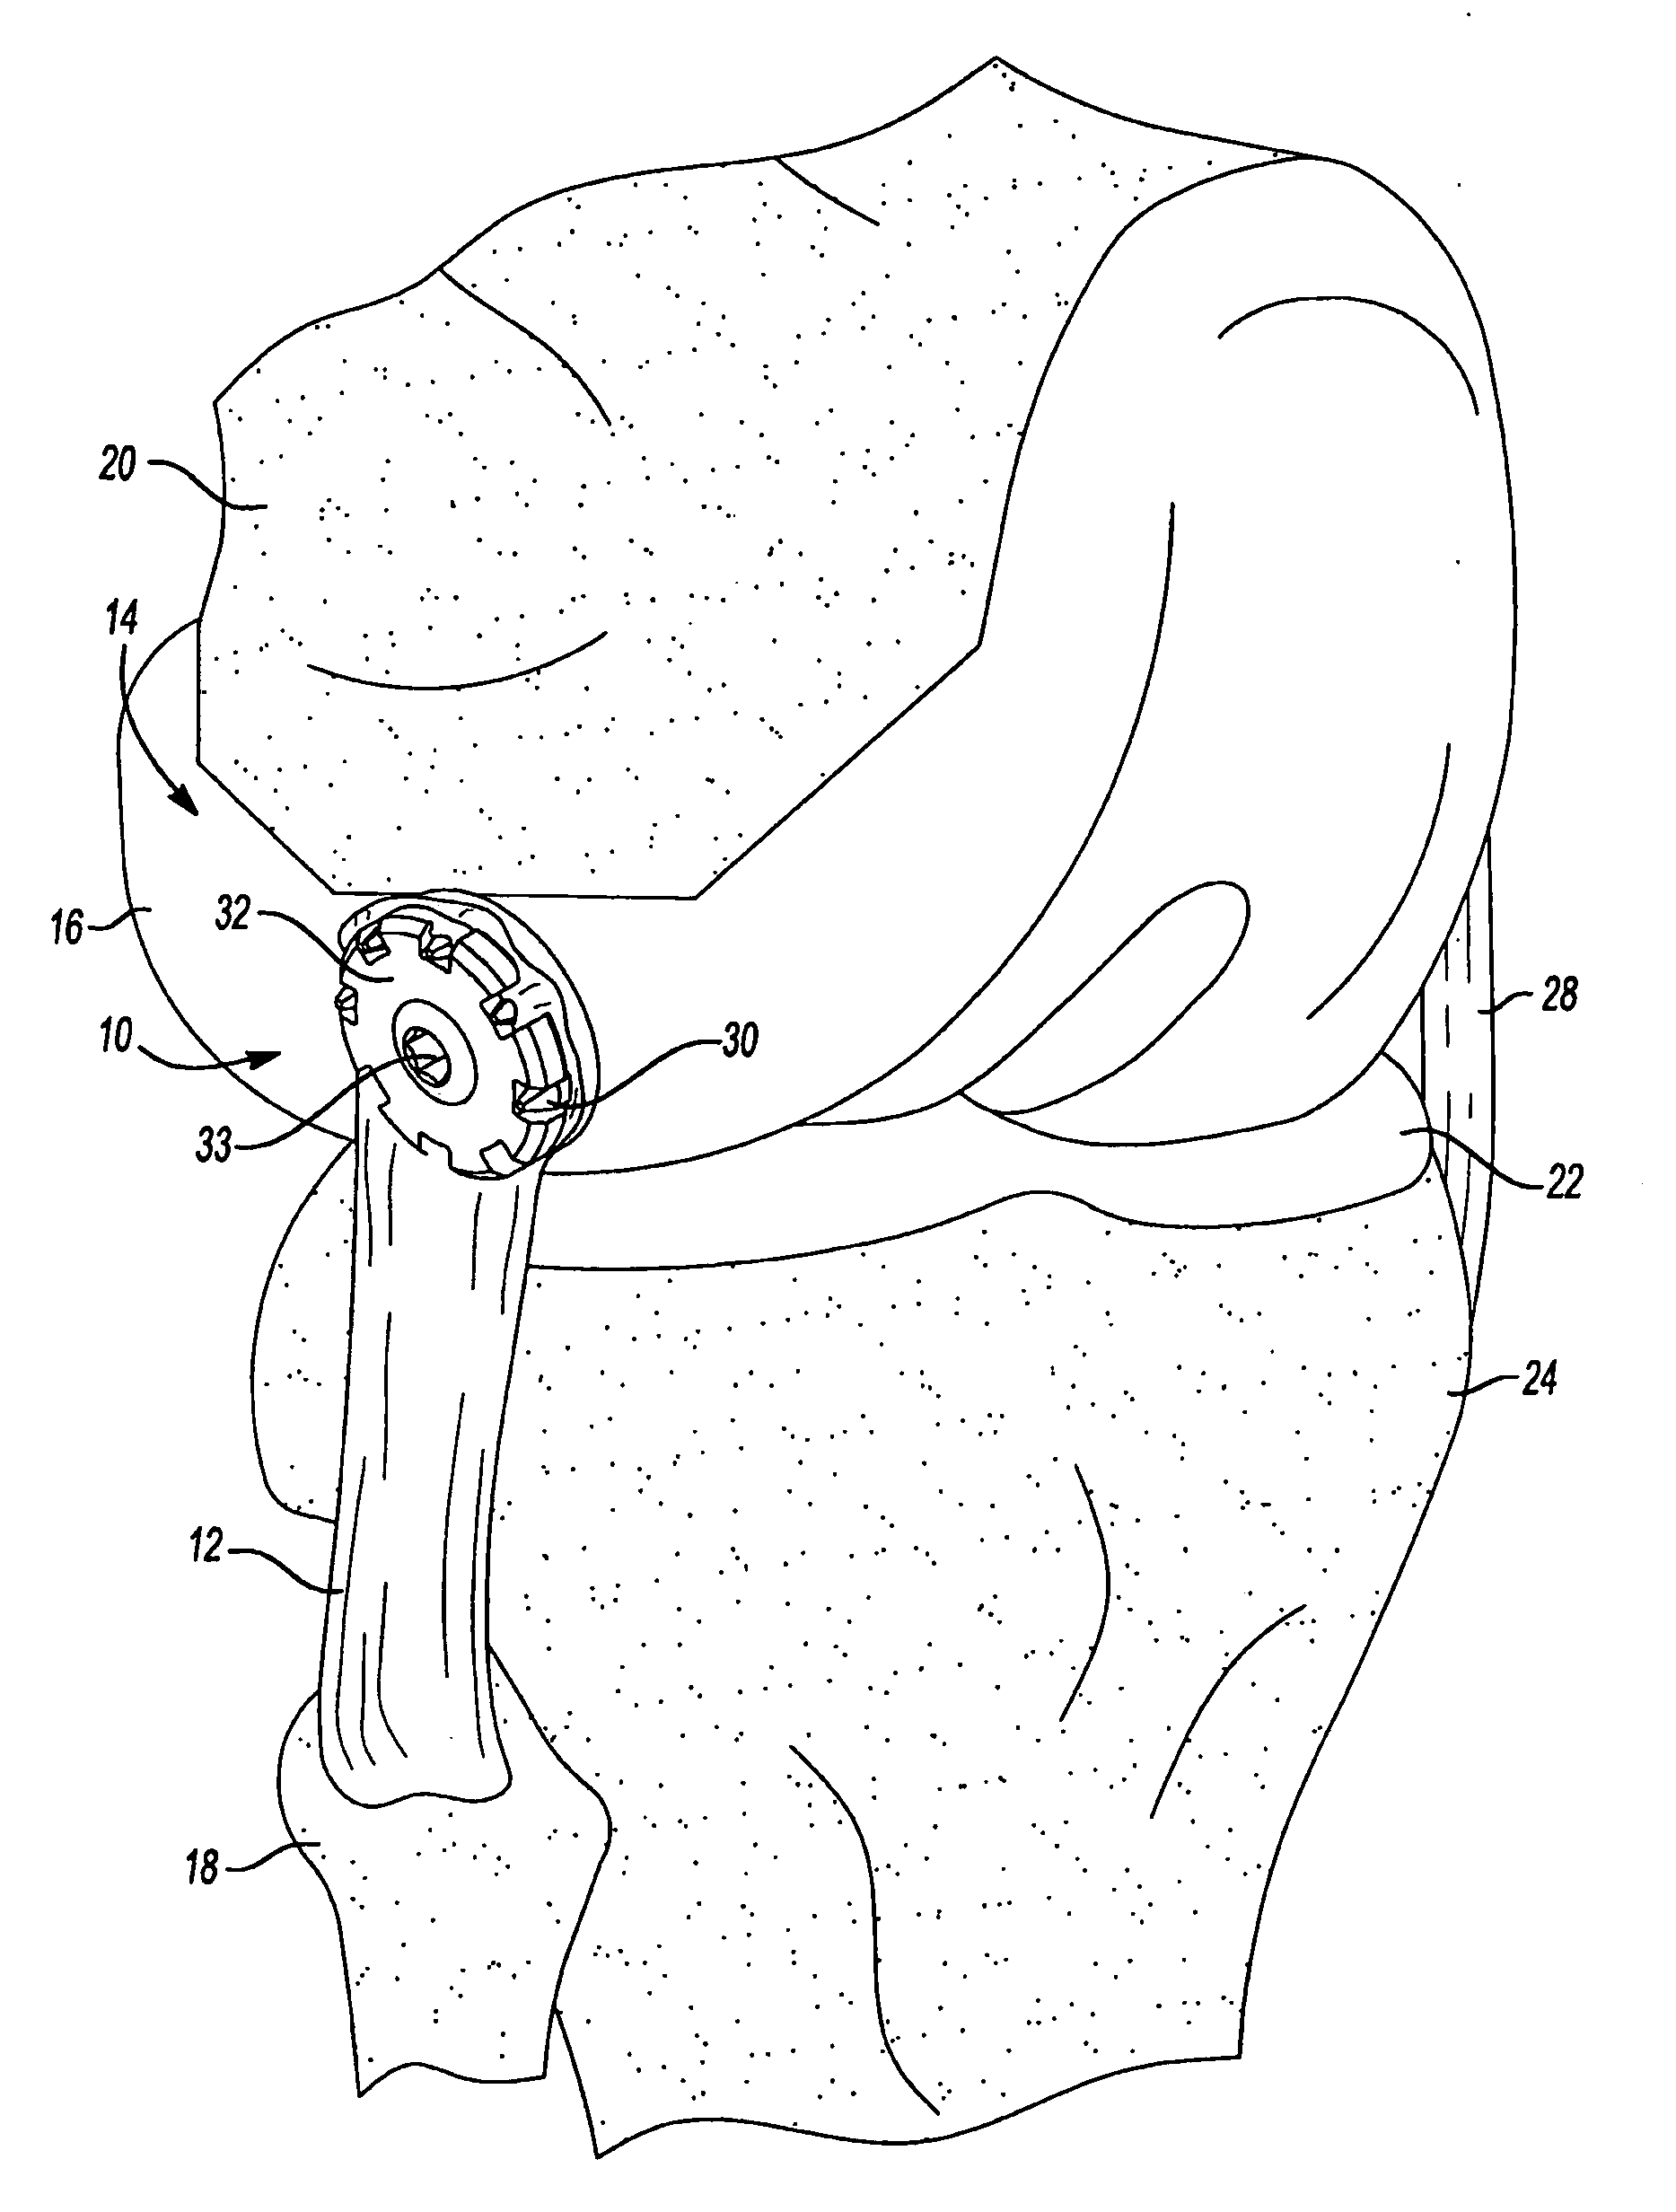 Method And Apparatus For Attaching Soft Tissue To An Implant